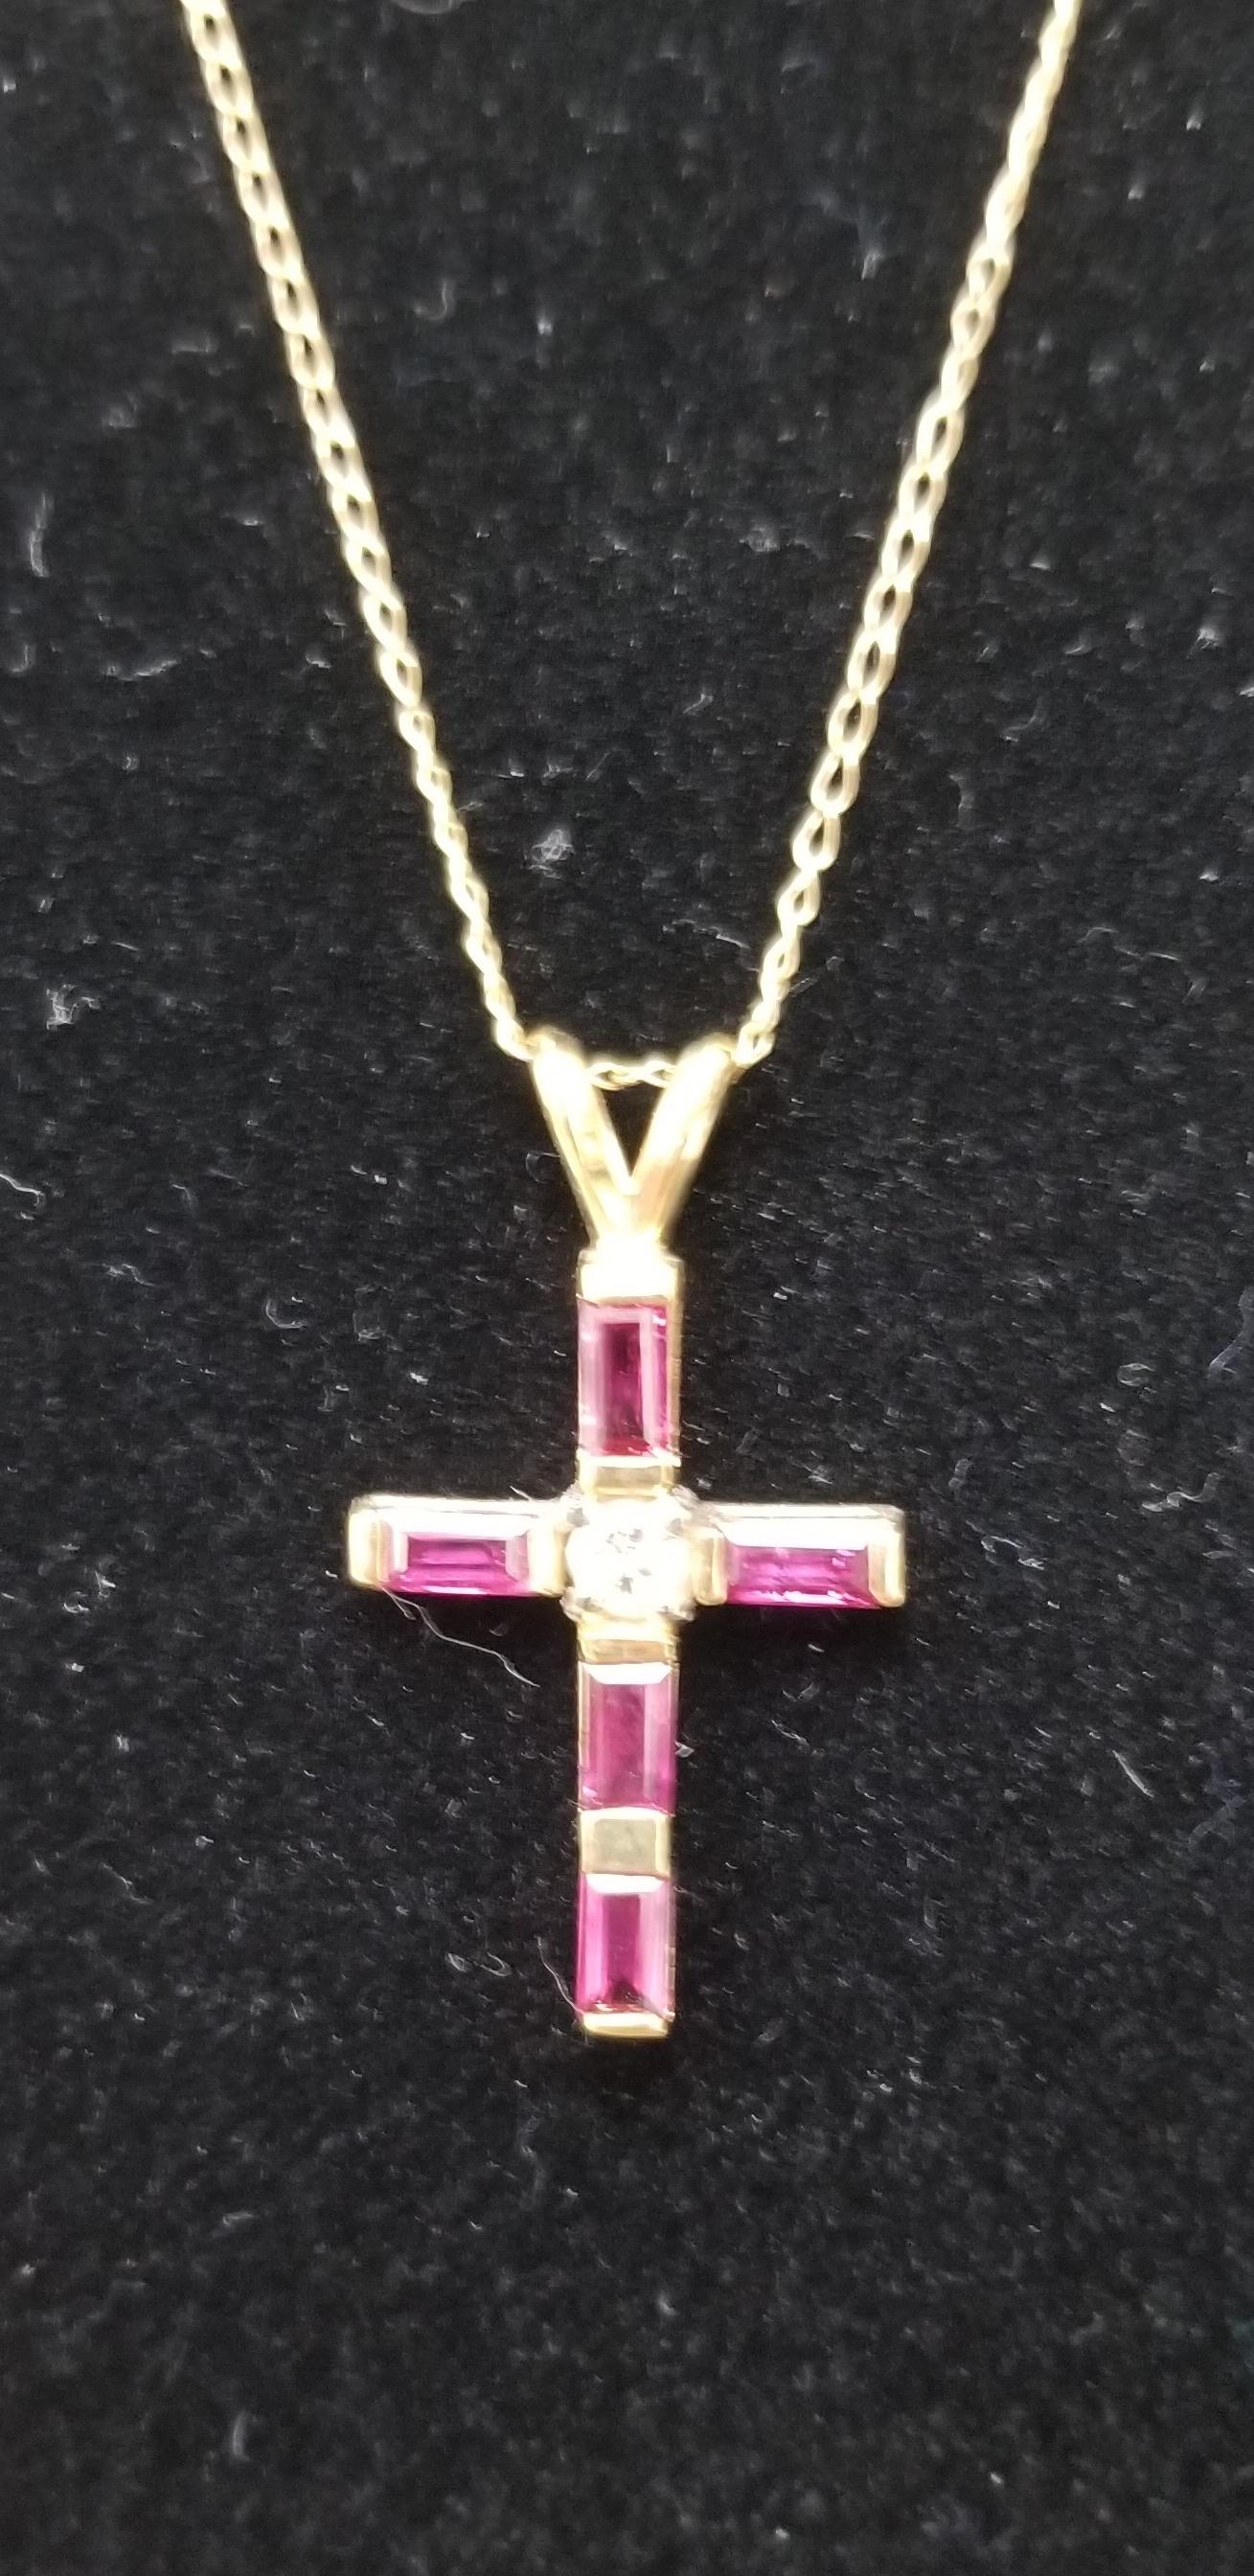 14k yellow gold 4 baguette rubies weighing .60pts. and 1 round full cut diamond weighing .09pts. on a 18 inch small link chain.